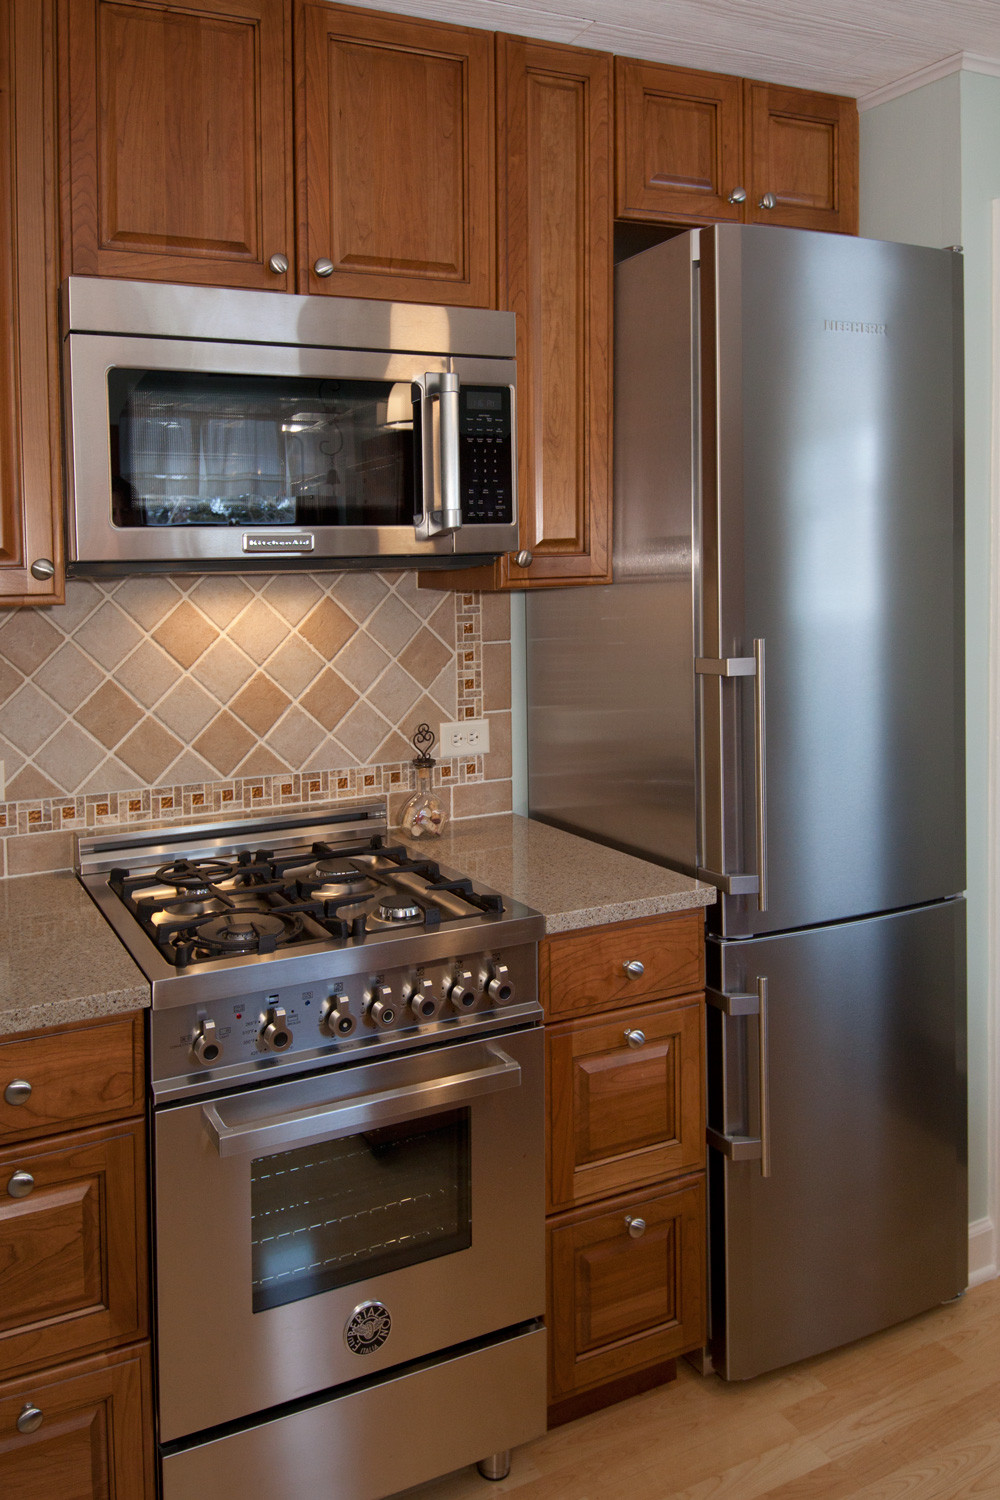 Remodel A Small Kitchen Best Of Small Kitchen Remodel Elmwood Park Il Better Kitchens